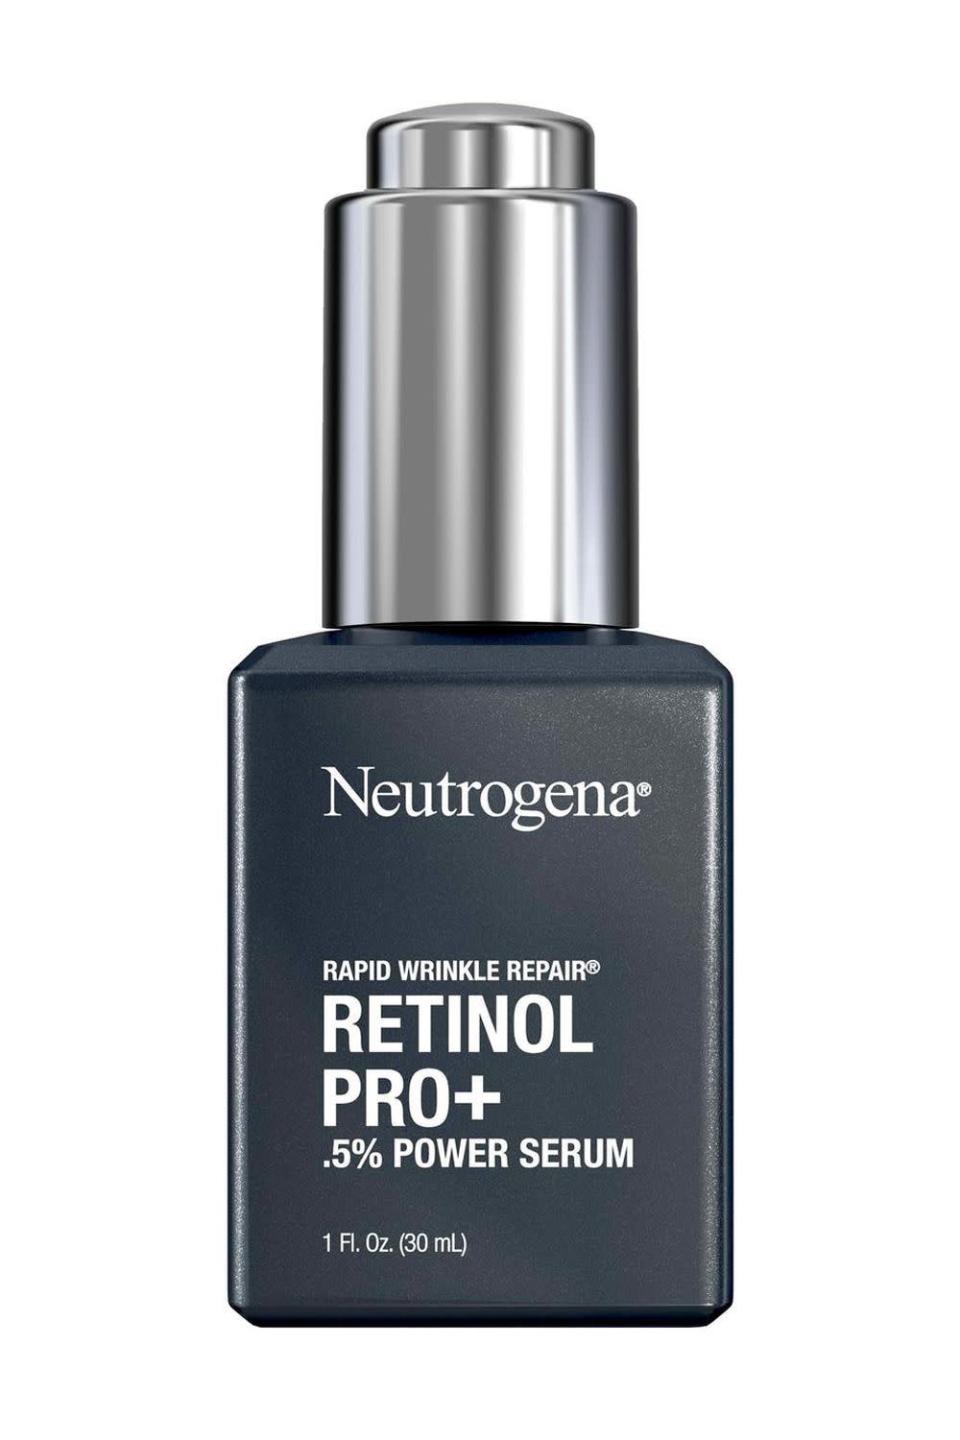 <p><strong>Neutrogena</strong></p><p>ulta.com</p><p><strong>$42.99</strong></p><p><a href="https://go.redirectingat.com?id=74968X1596630&url=https%3A%2F%2Fwww.ulta.com%2Fp%2Frapid-wrinkle-repair-retinol-pro-5-power-serum-pimprod2028416&sref=https%3A%2F%2Fwww.cosmopolitan.com%2Fstyle-beauty%2Fbeauty%2Fg40604552%2Fbest-anti-aging-serums%2F" rel="nofollow noopener" target="_blank" data-ylk="slk:Shop Now" class="link ">Shop Now</a></p><p>If you love <a href="https://www.cosmopolitan.com/style-beauty/beauty/g28668988/best-drugstore-skincare/" rel="nofollow noopener" target="_blank" data-ylk="slk:drugstore skincare" class="link ">drugstore skincare</a>, this anti-aging serum from Neutrogena should be on the top of your list. The lightweight, fast-absorbing formula <strong>contains 0.5 percent retinol to smooth lines and wrinkles </strong>and improve skin firmness and elasticity too. Even better? At $43 dollars, it's the least expensive option on the list.</p><p><em><strong>THE REVIEW: </strong>"I have been using this for about three weeks now and I've already noticed the fine wrinkles starting to soften around my mouth," reads one review. " It leaves my skin feeling so soft and dewy too."</em></p>